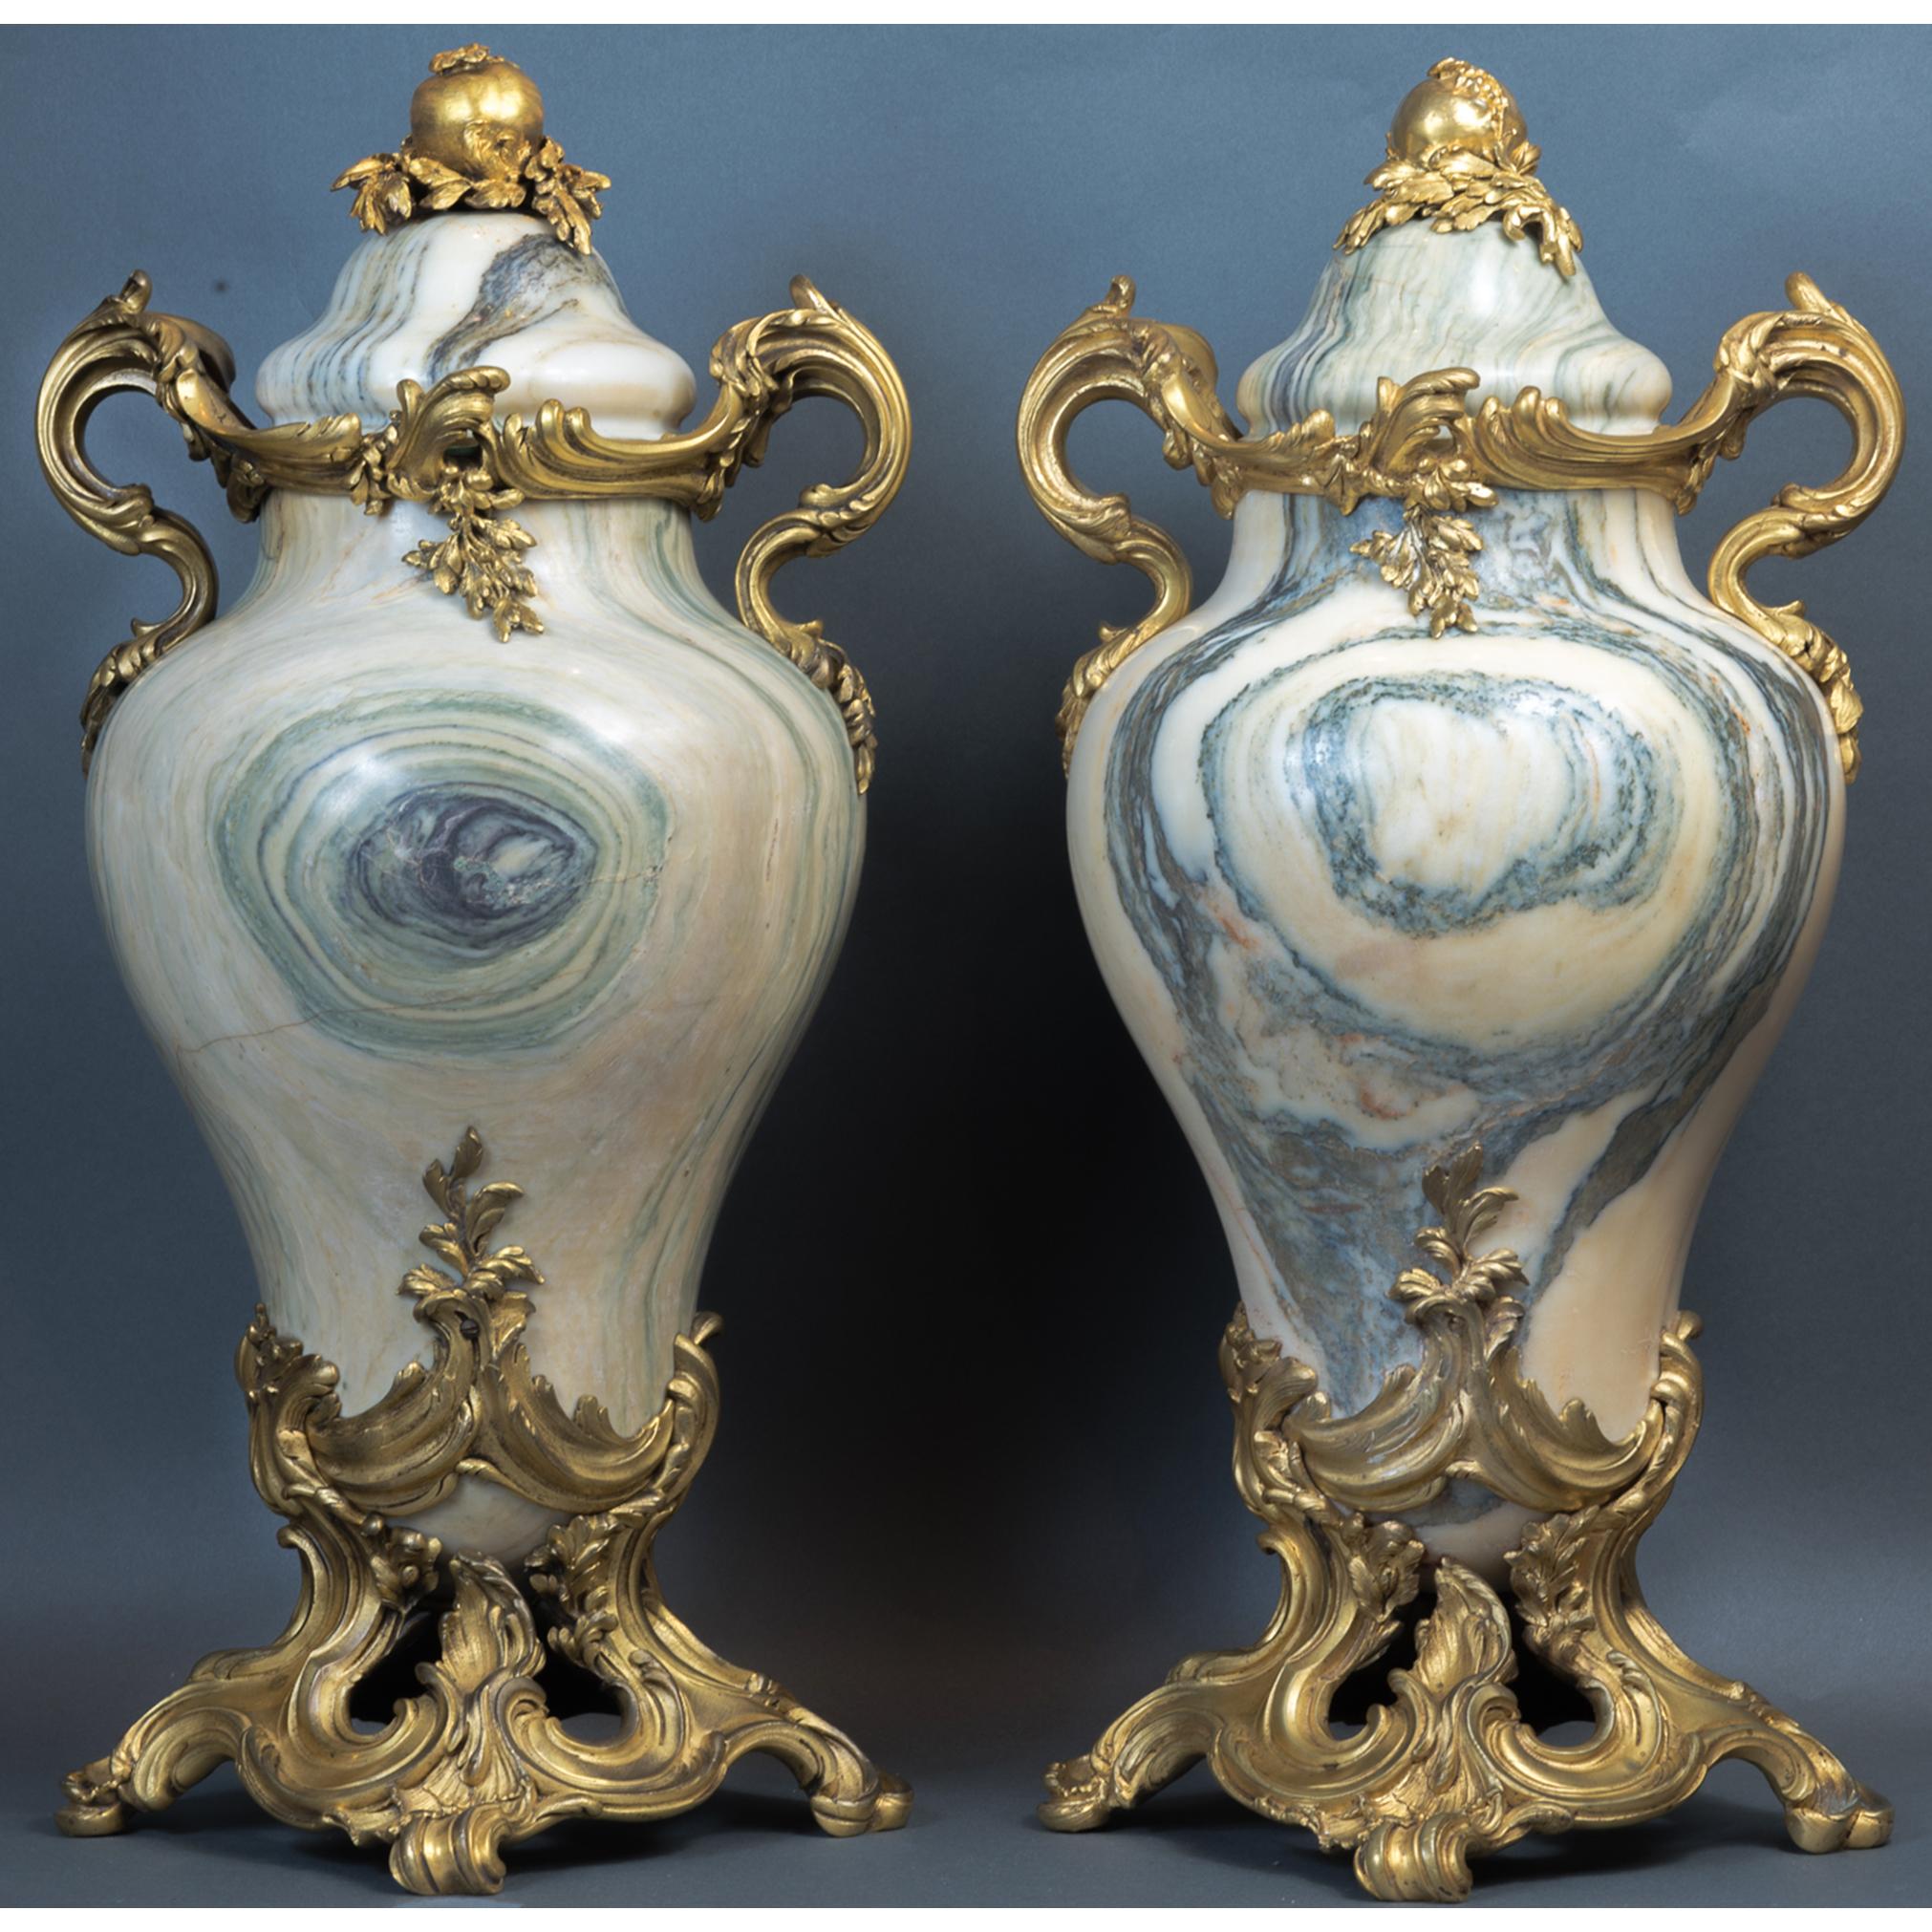 French gilt bronze-mounted Verde marble Urns decorated with open Pomegranate and foliage ornamentation. 

Date: Late 19th C

Dimensions: 8.6 x 21.

